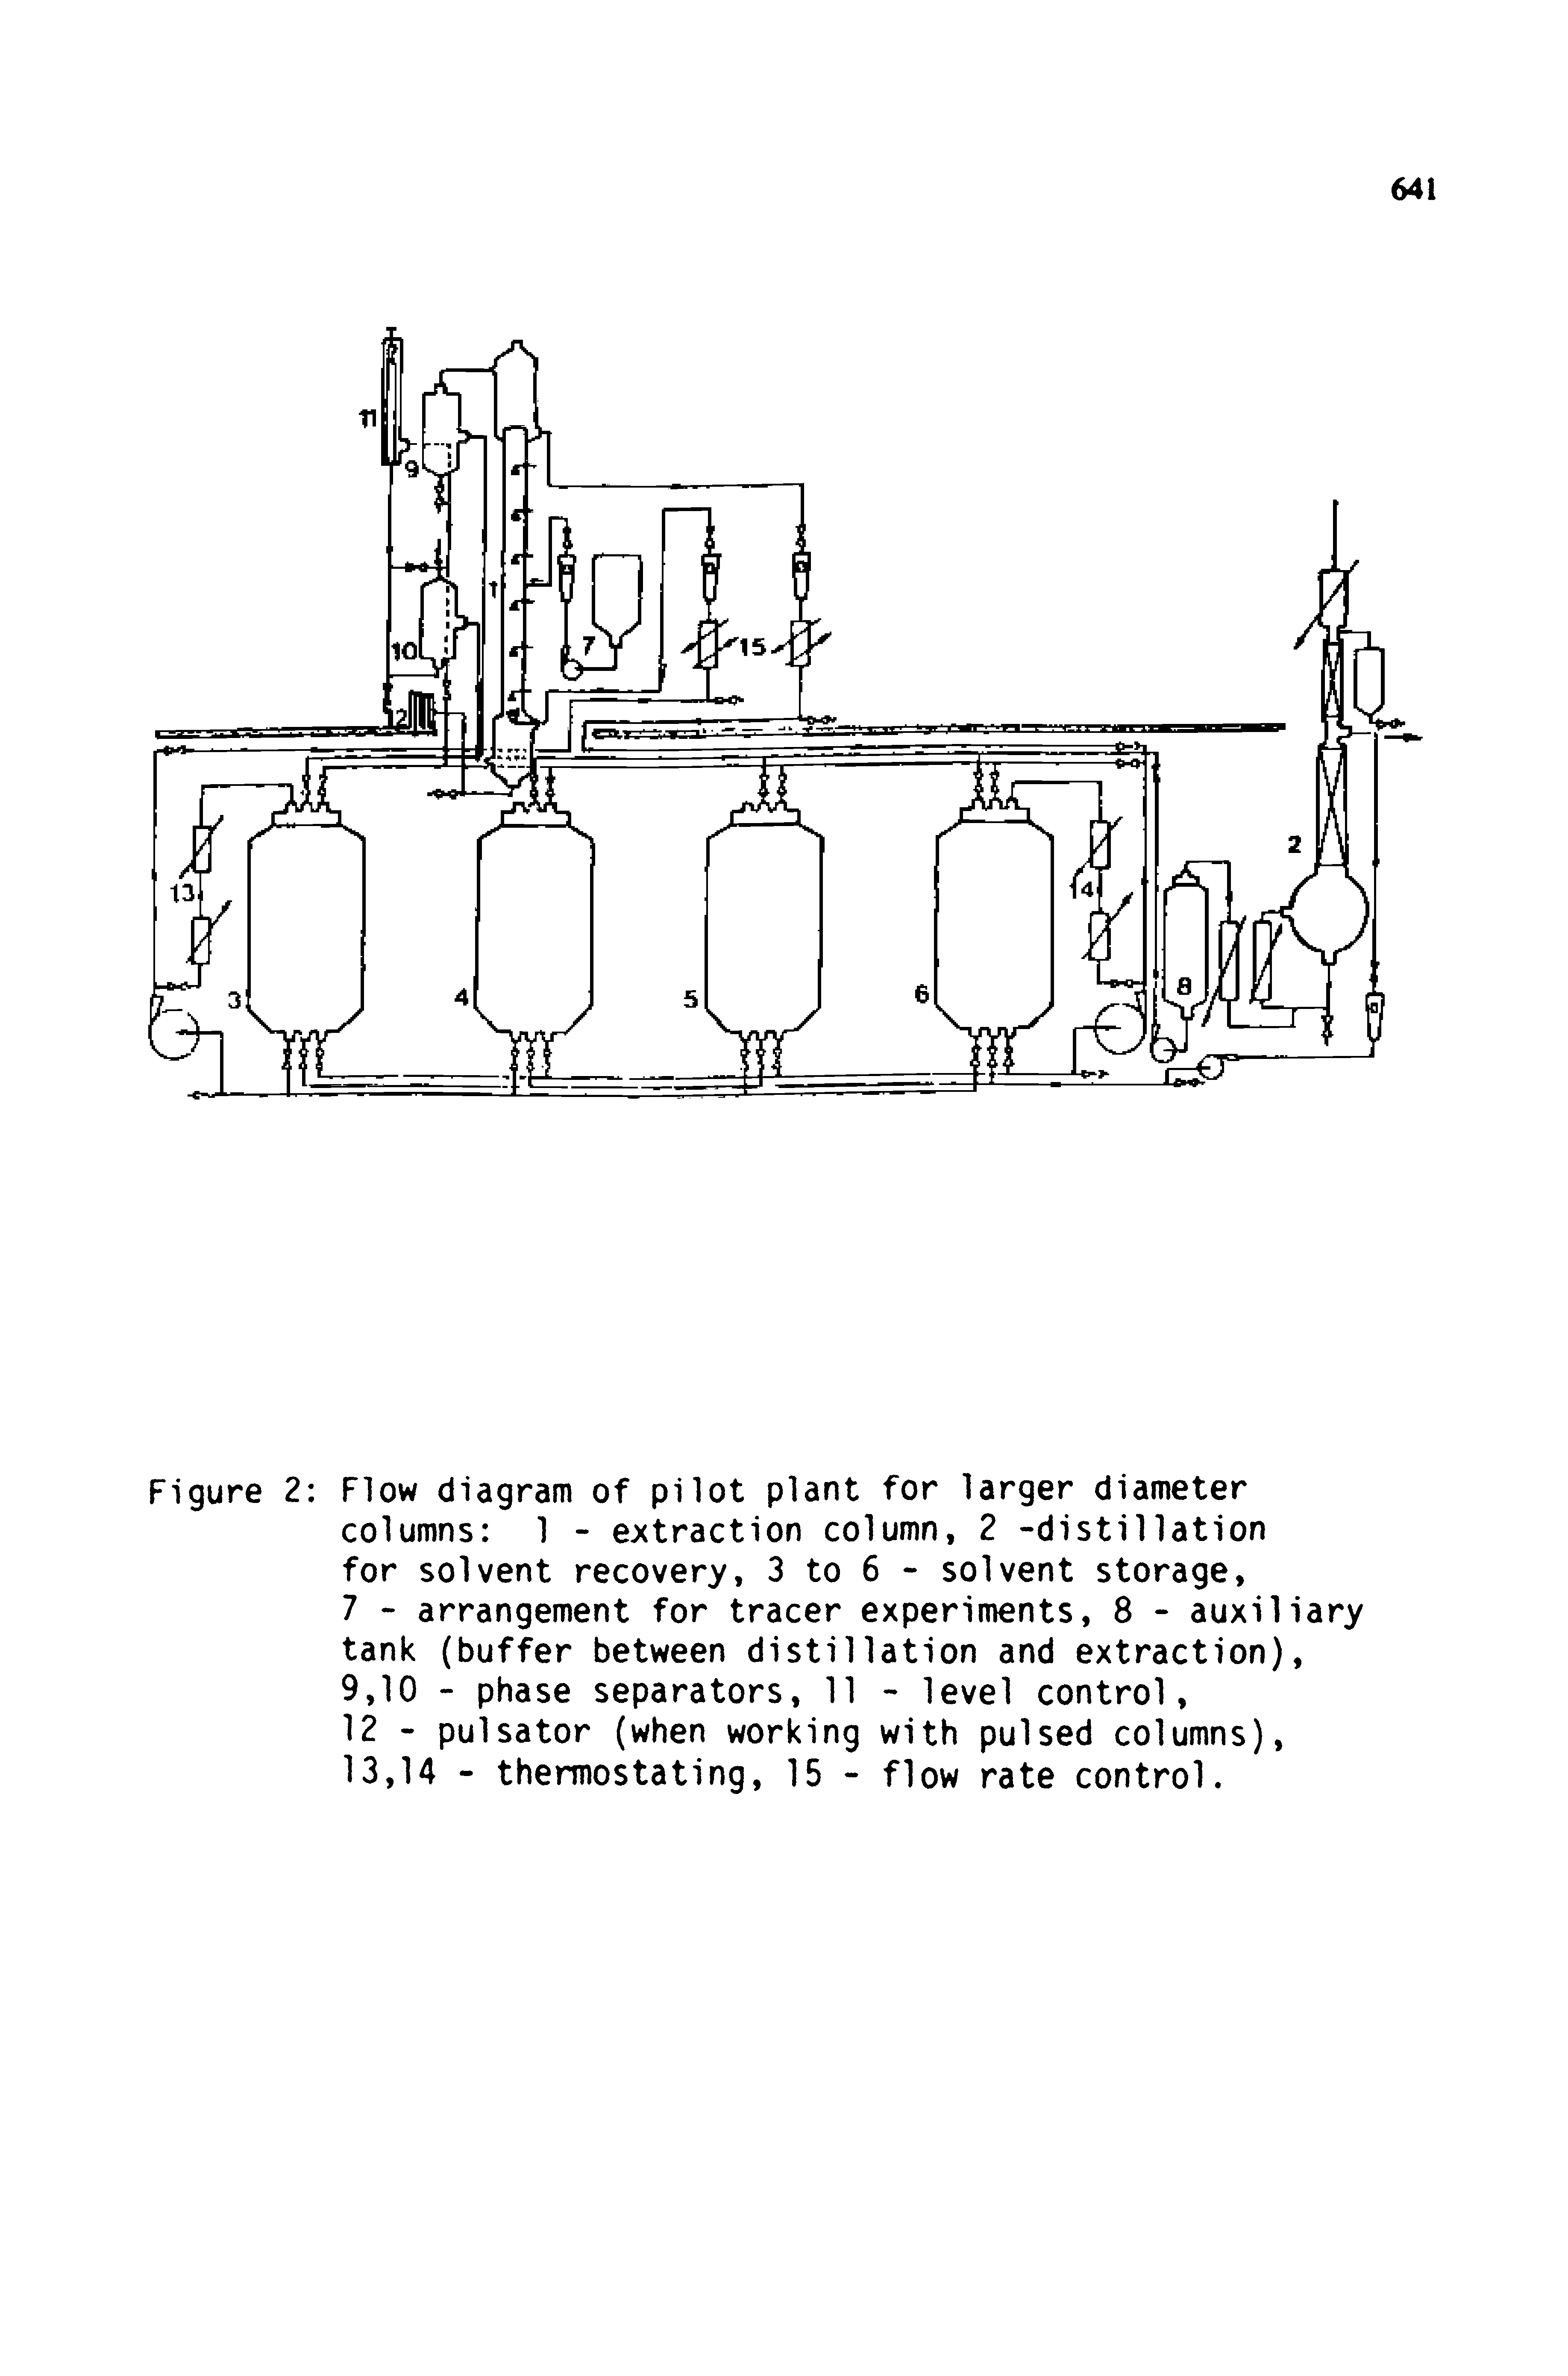 Figure 2 Flow diagram of pilot plant for larger diameter columns 1 - extraction column, 2 -distillation for solvent recovery, 3 to 6 - solvent storage,...